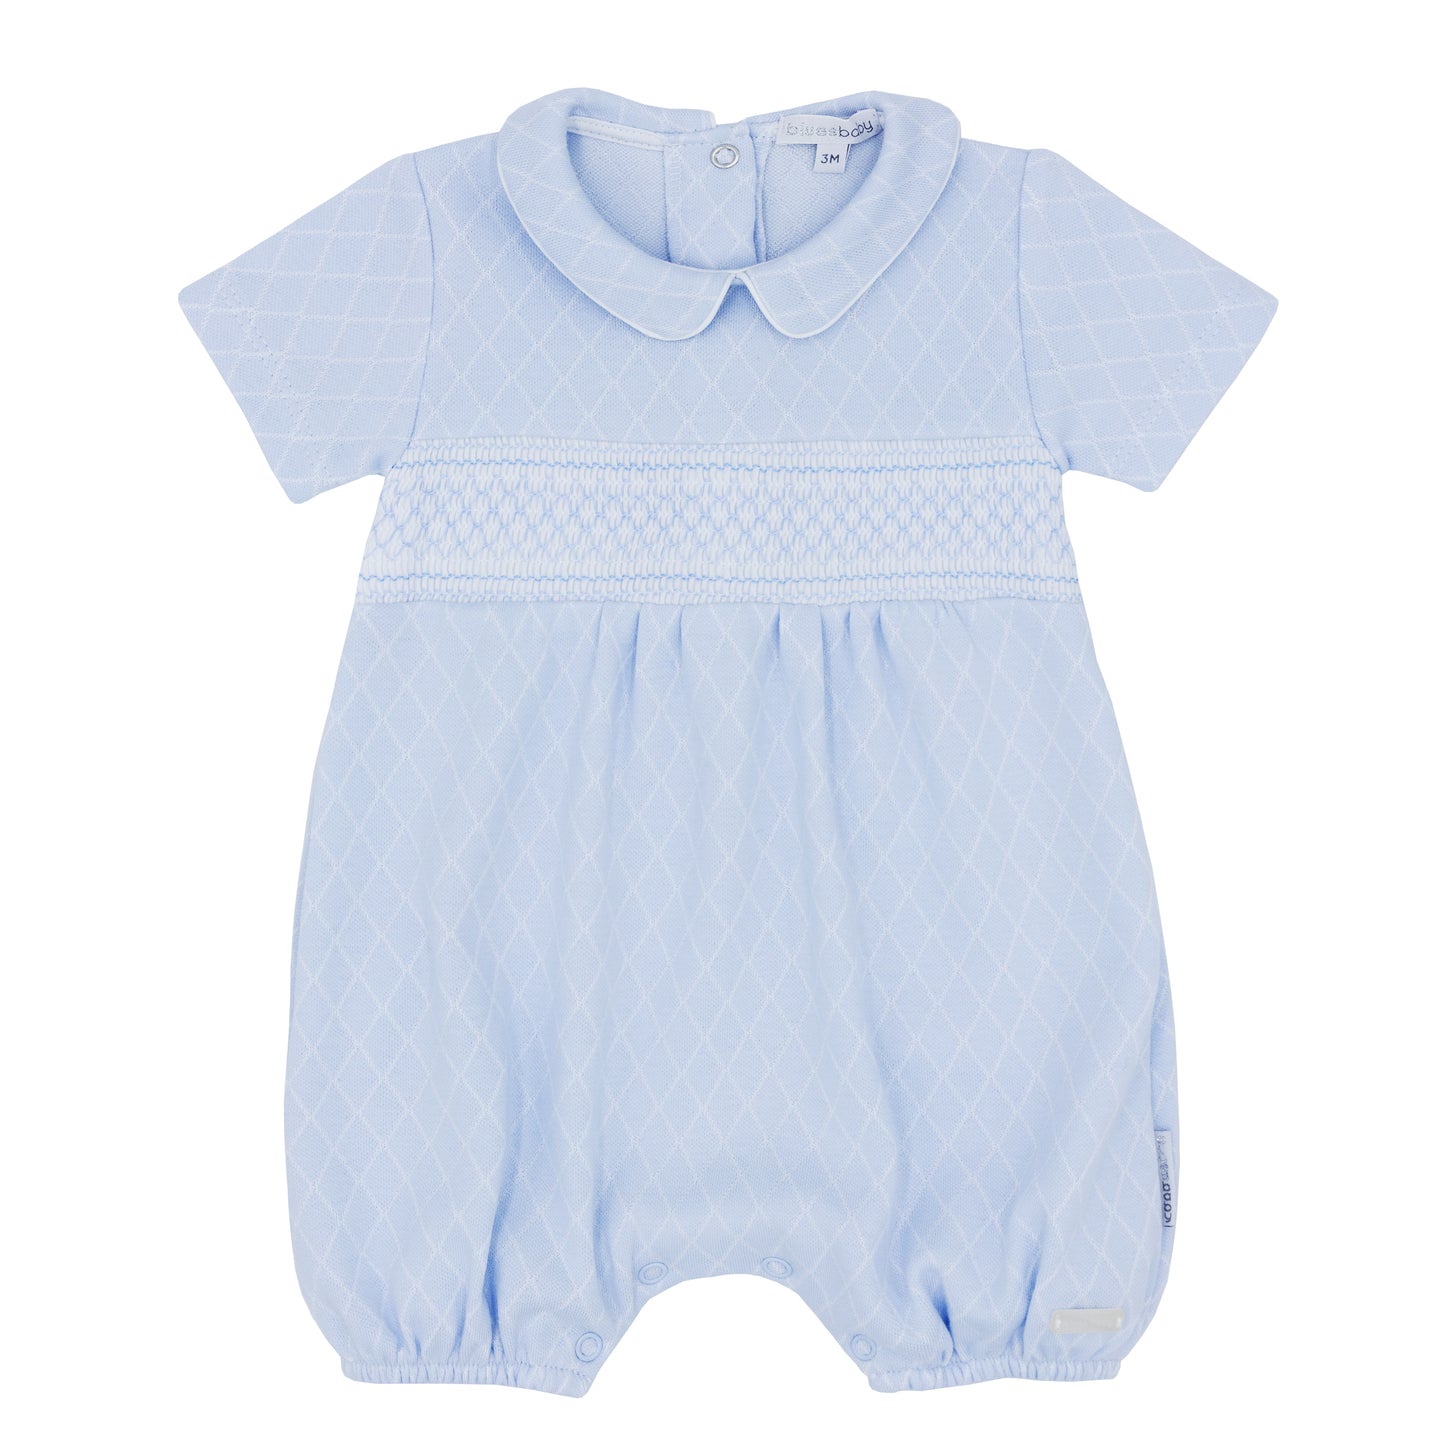 Blues Baby Boys Shortie Romper with Smocking